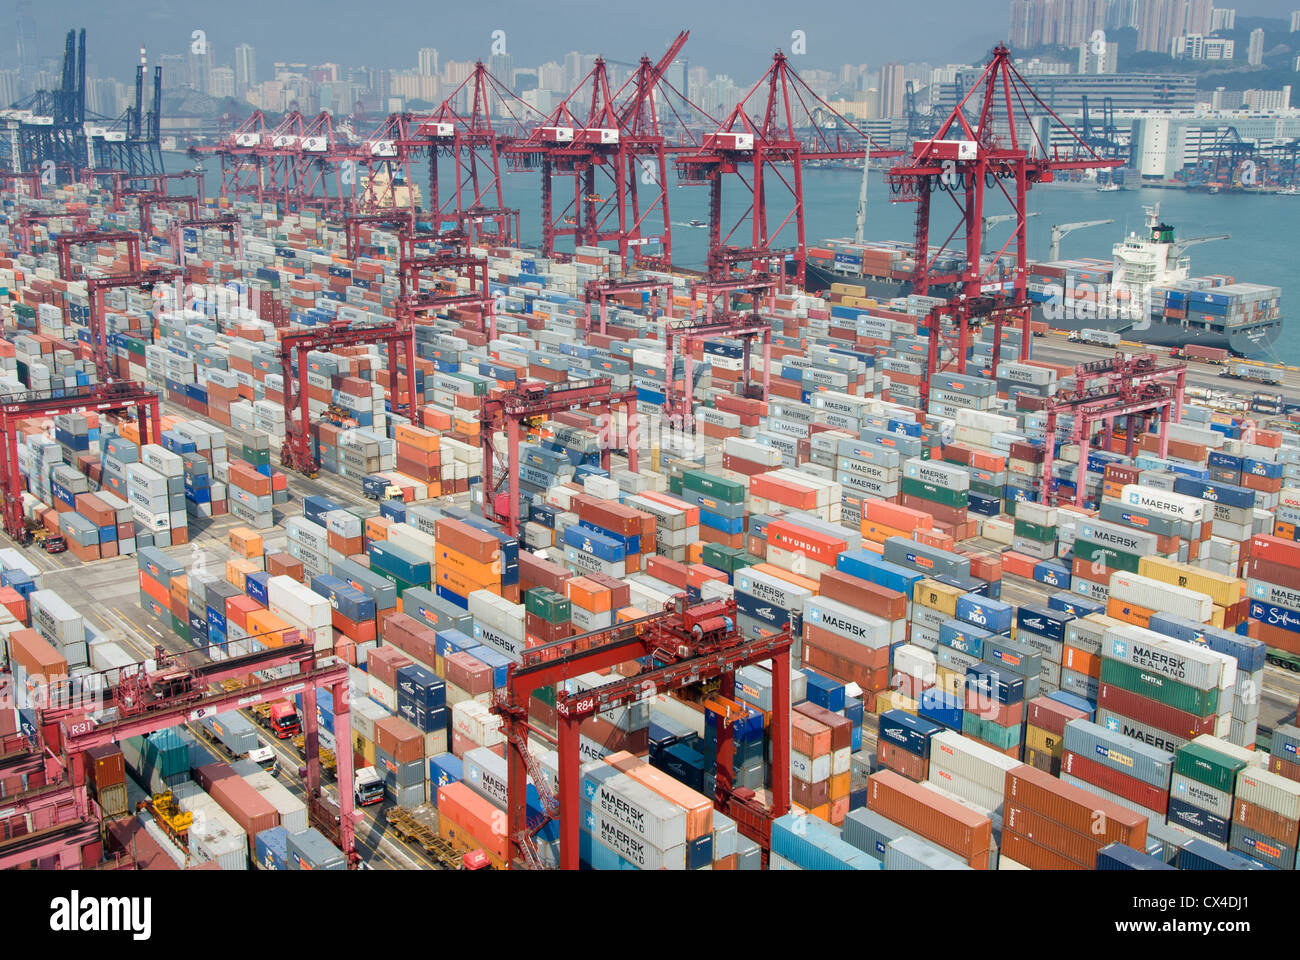 Occupato il terminal container No.9 in Kwai Chung Hong Kong Foto Stock